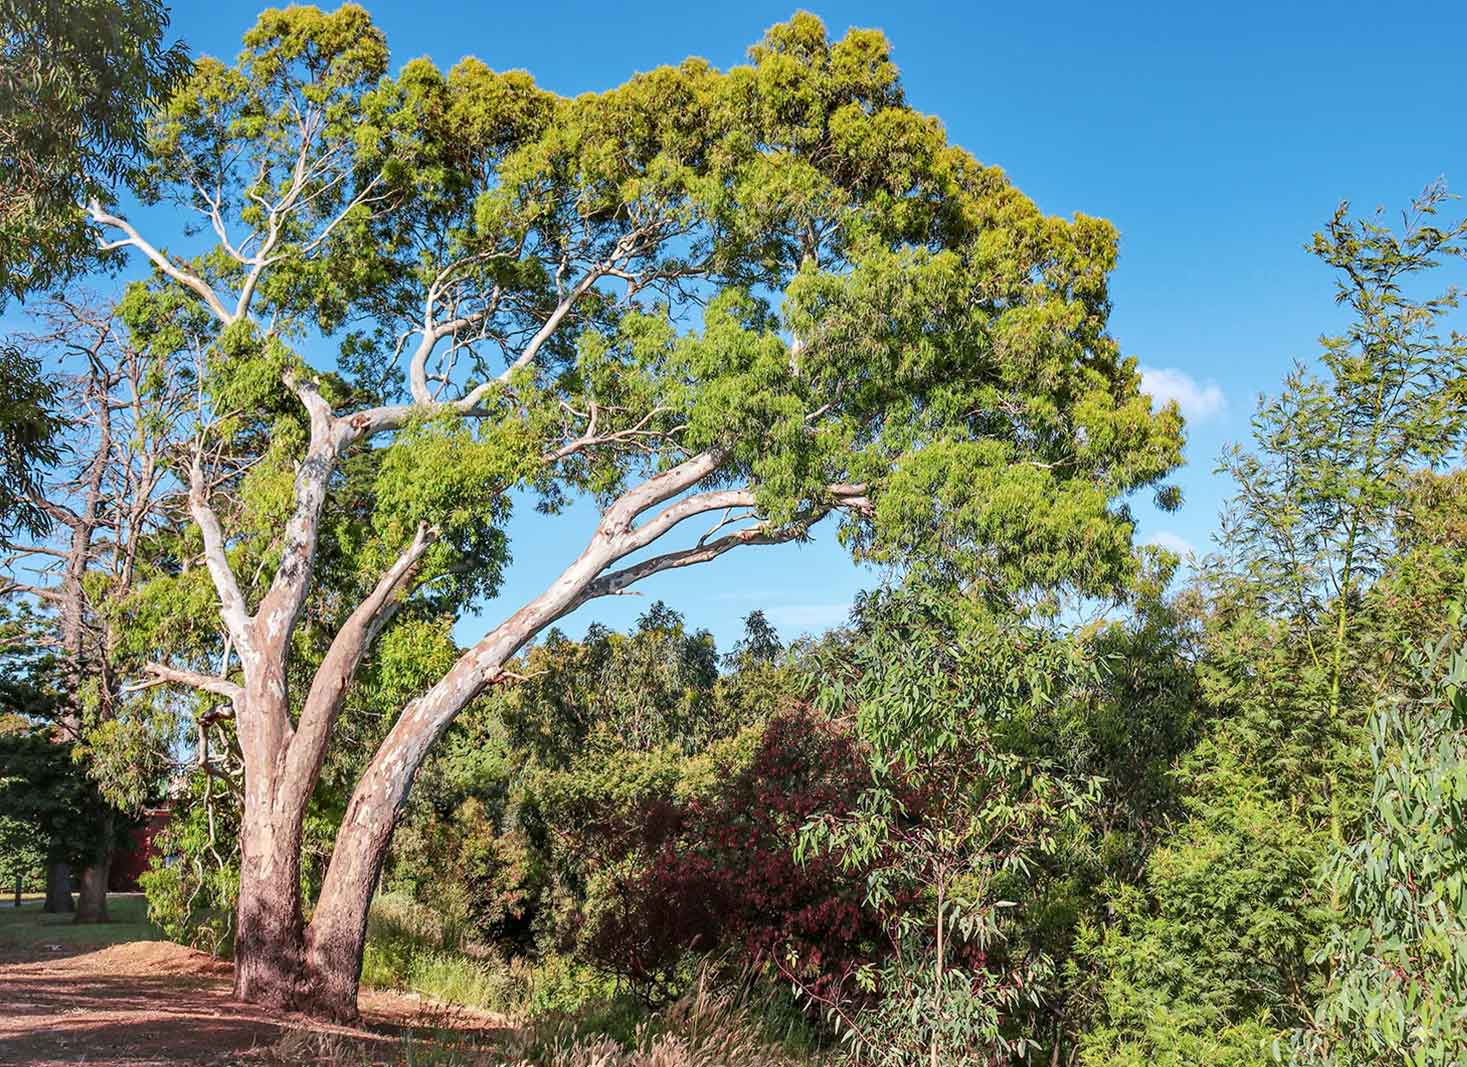 Are gum trees protected in NSW